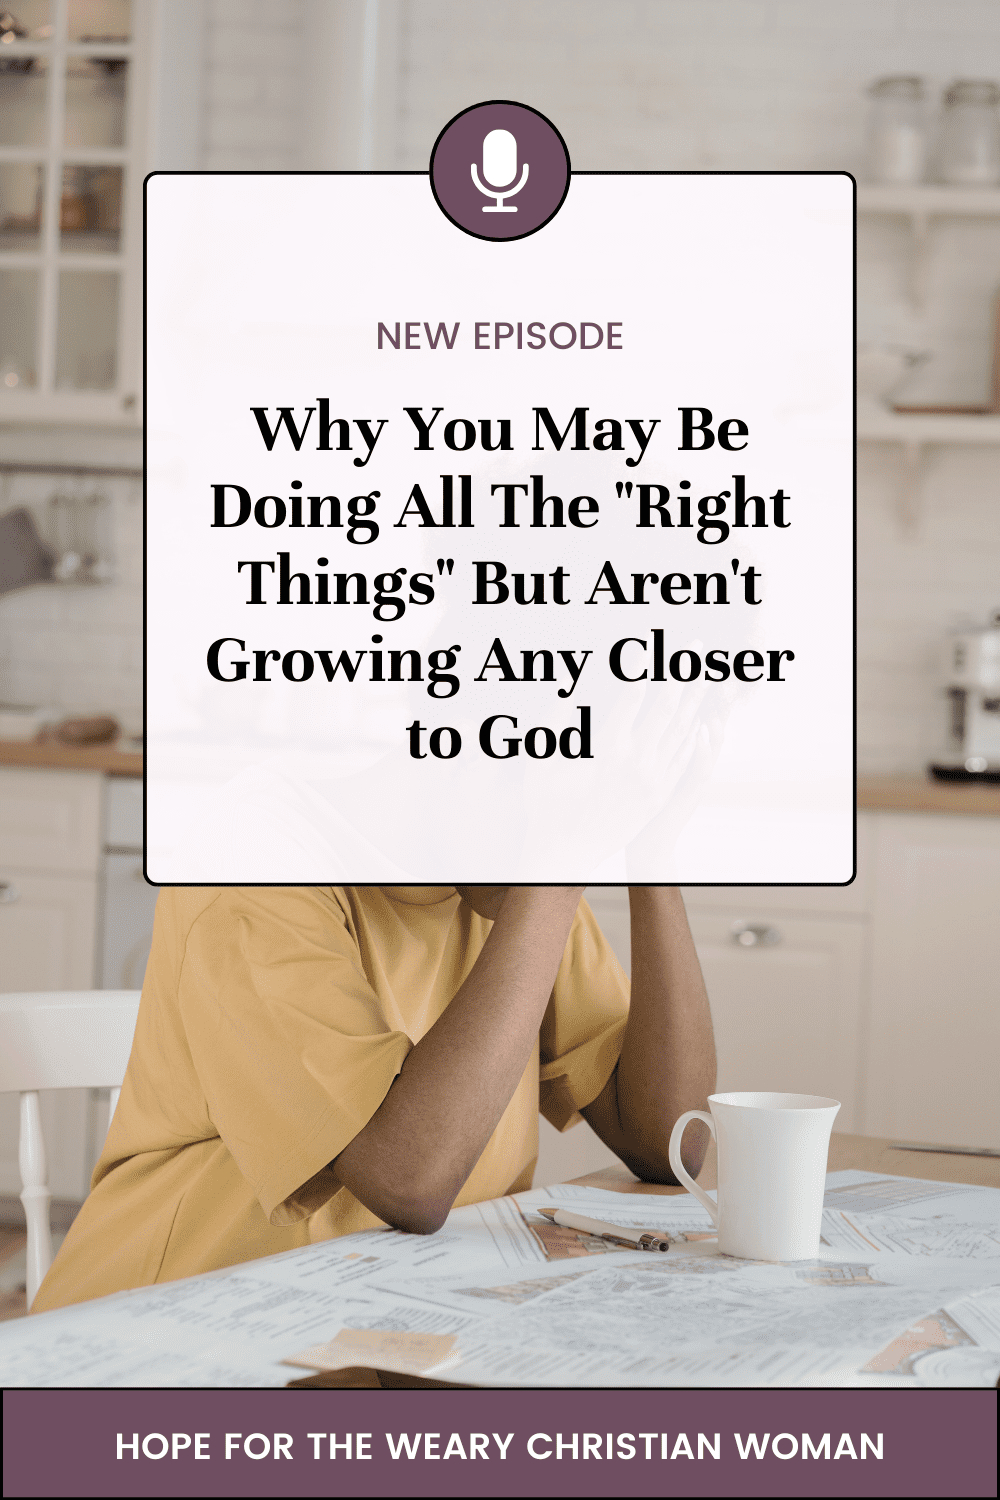 As an introverted Christian woman it can be hard to grow closer to God? Learn the real reason that all the "right things" aren't working for you - plus, tips about how to strengthen your faith as an HSP or highly sensitive introverted Christian woman.